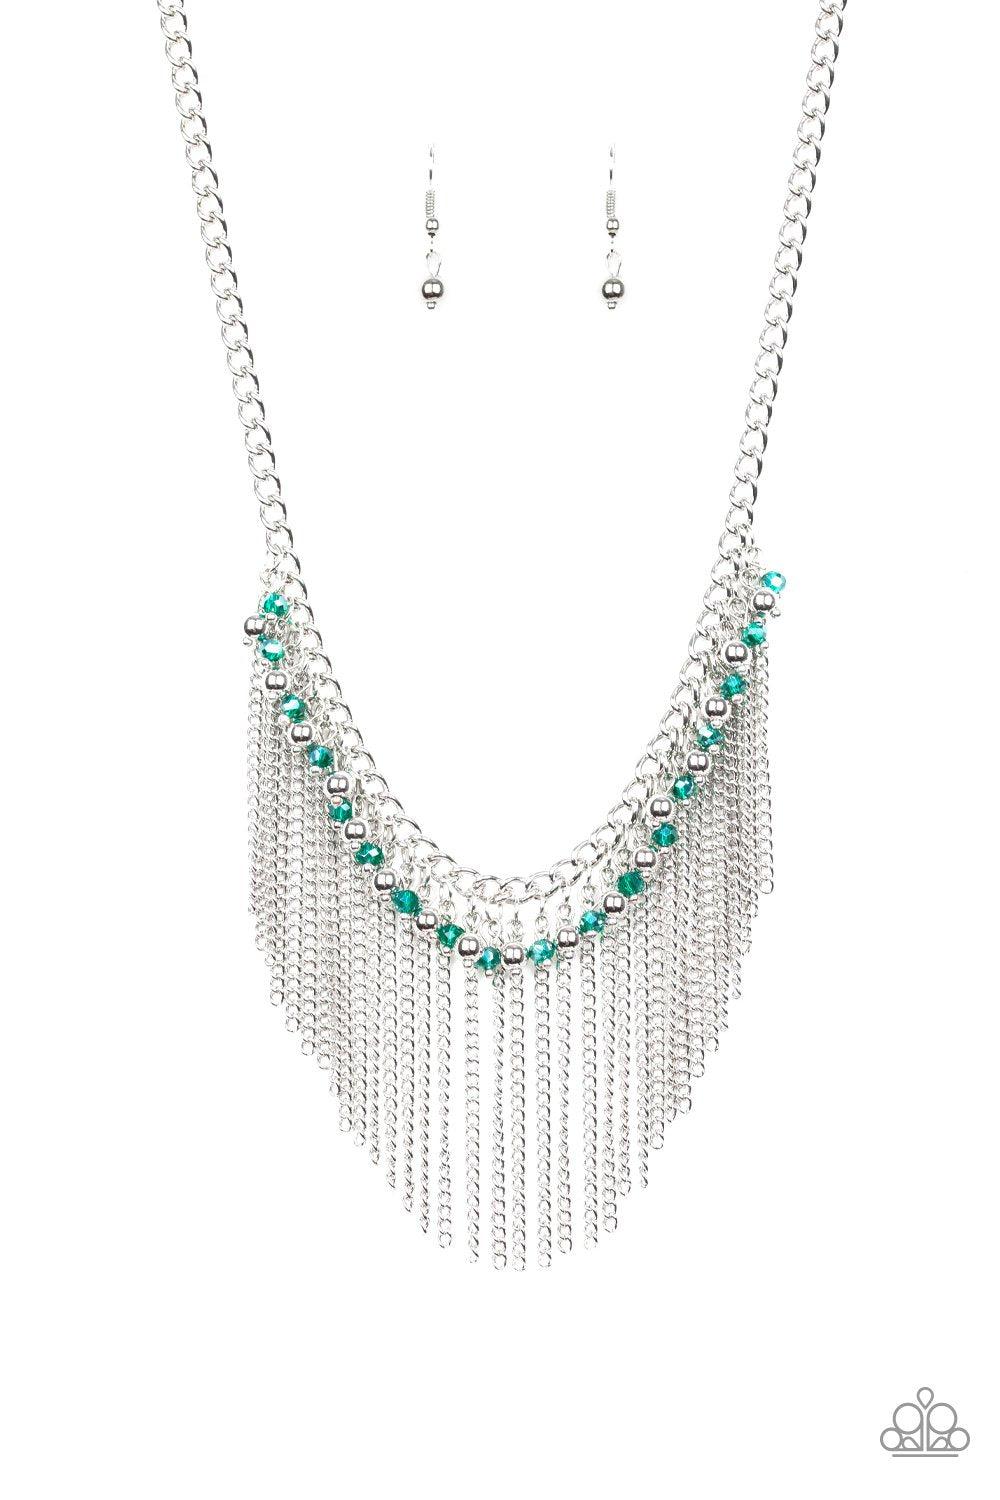 Divinely Diva Green and Silver Necklace - Paparazzi Accessories - lightbox -CarasShop.com - $5 Jewelry by Cara Jewels